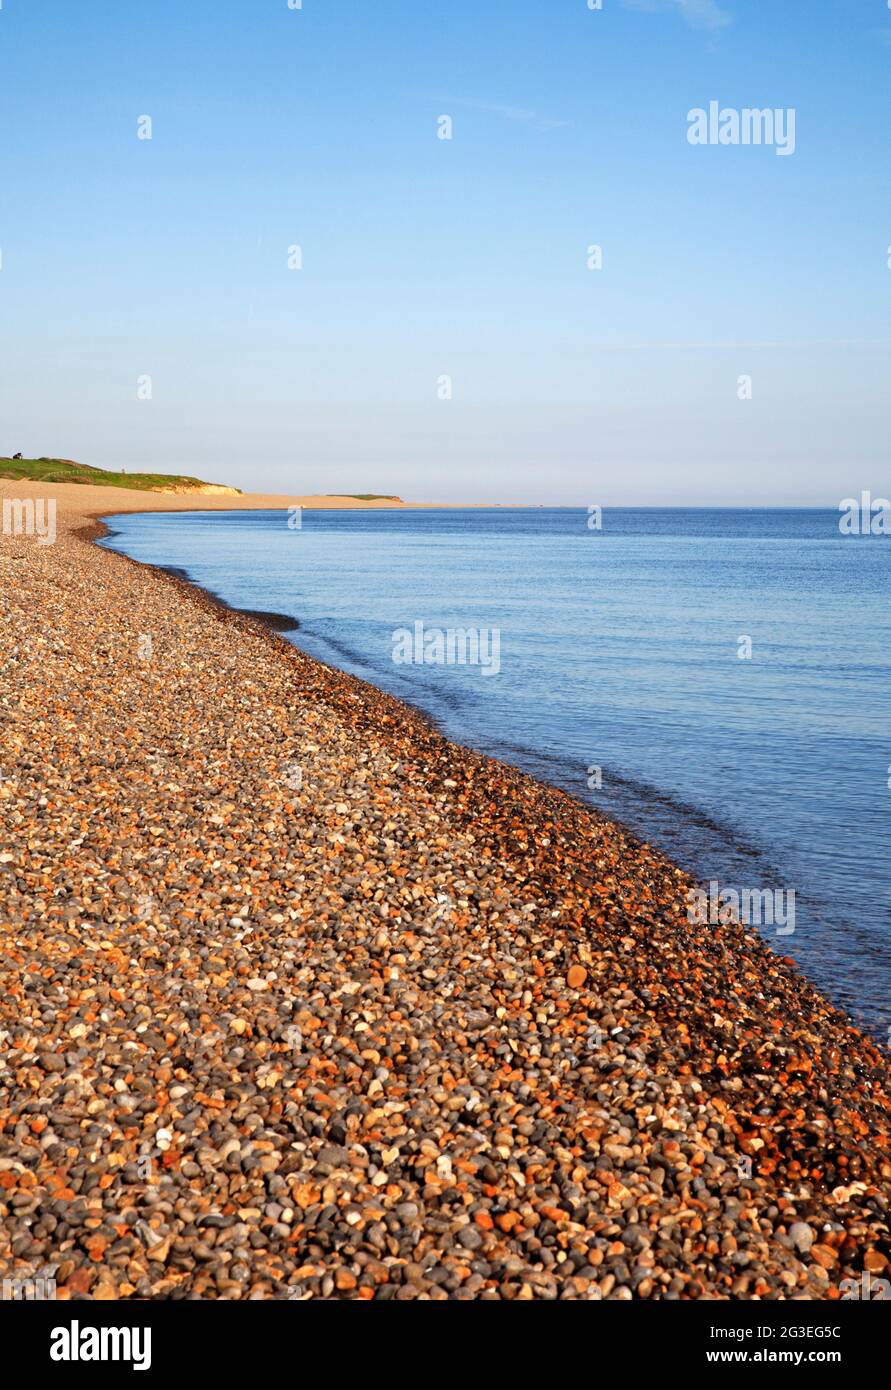 A view of the shoreline receding westwards in an Area of Outstanding Natural Beauty in North Norfolk at Weybourne, Norfolk, England, United Kingdom. Stock Photo